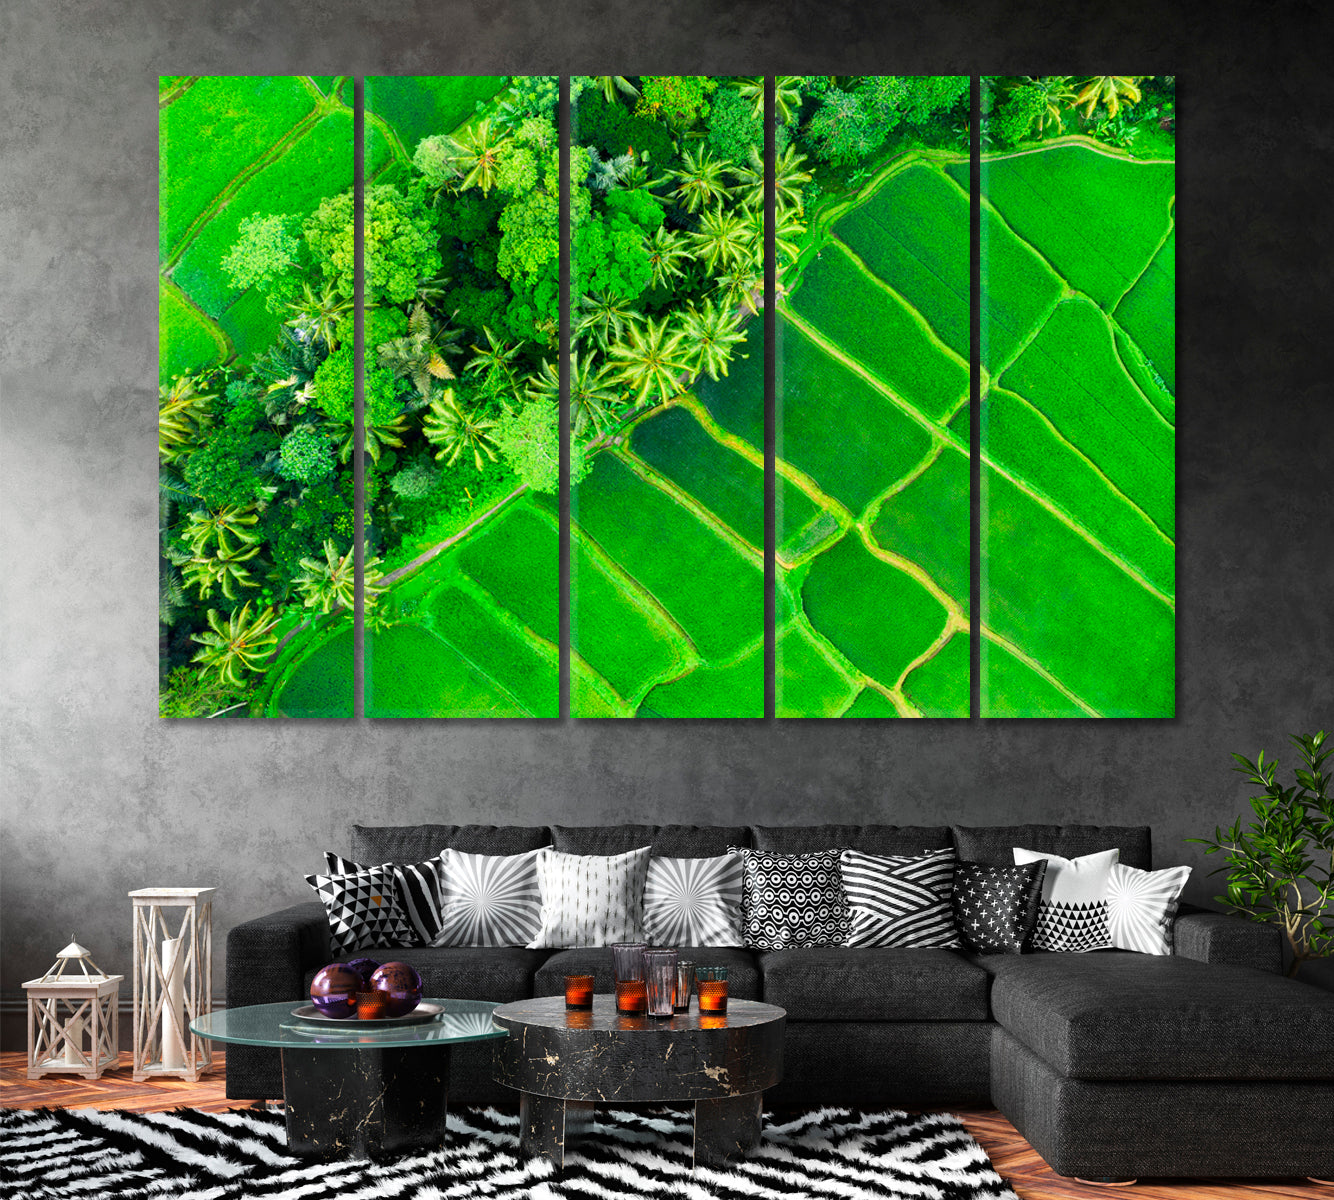 Rice Terraces in Summer Bali Indonesia Canvas Print ArtLexy 5 Panels 36"x24" inches 